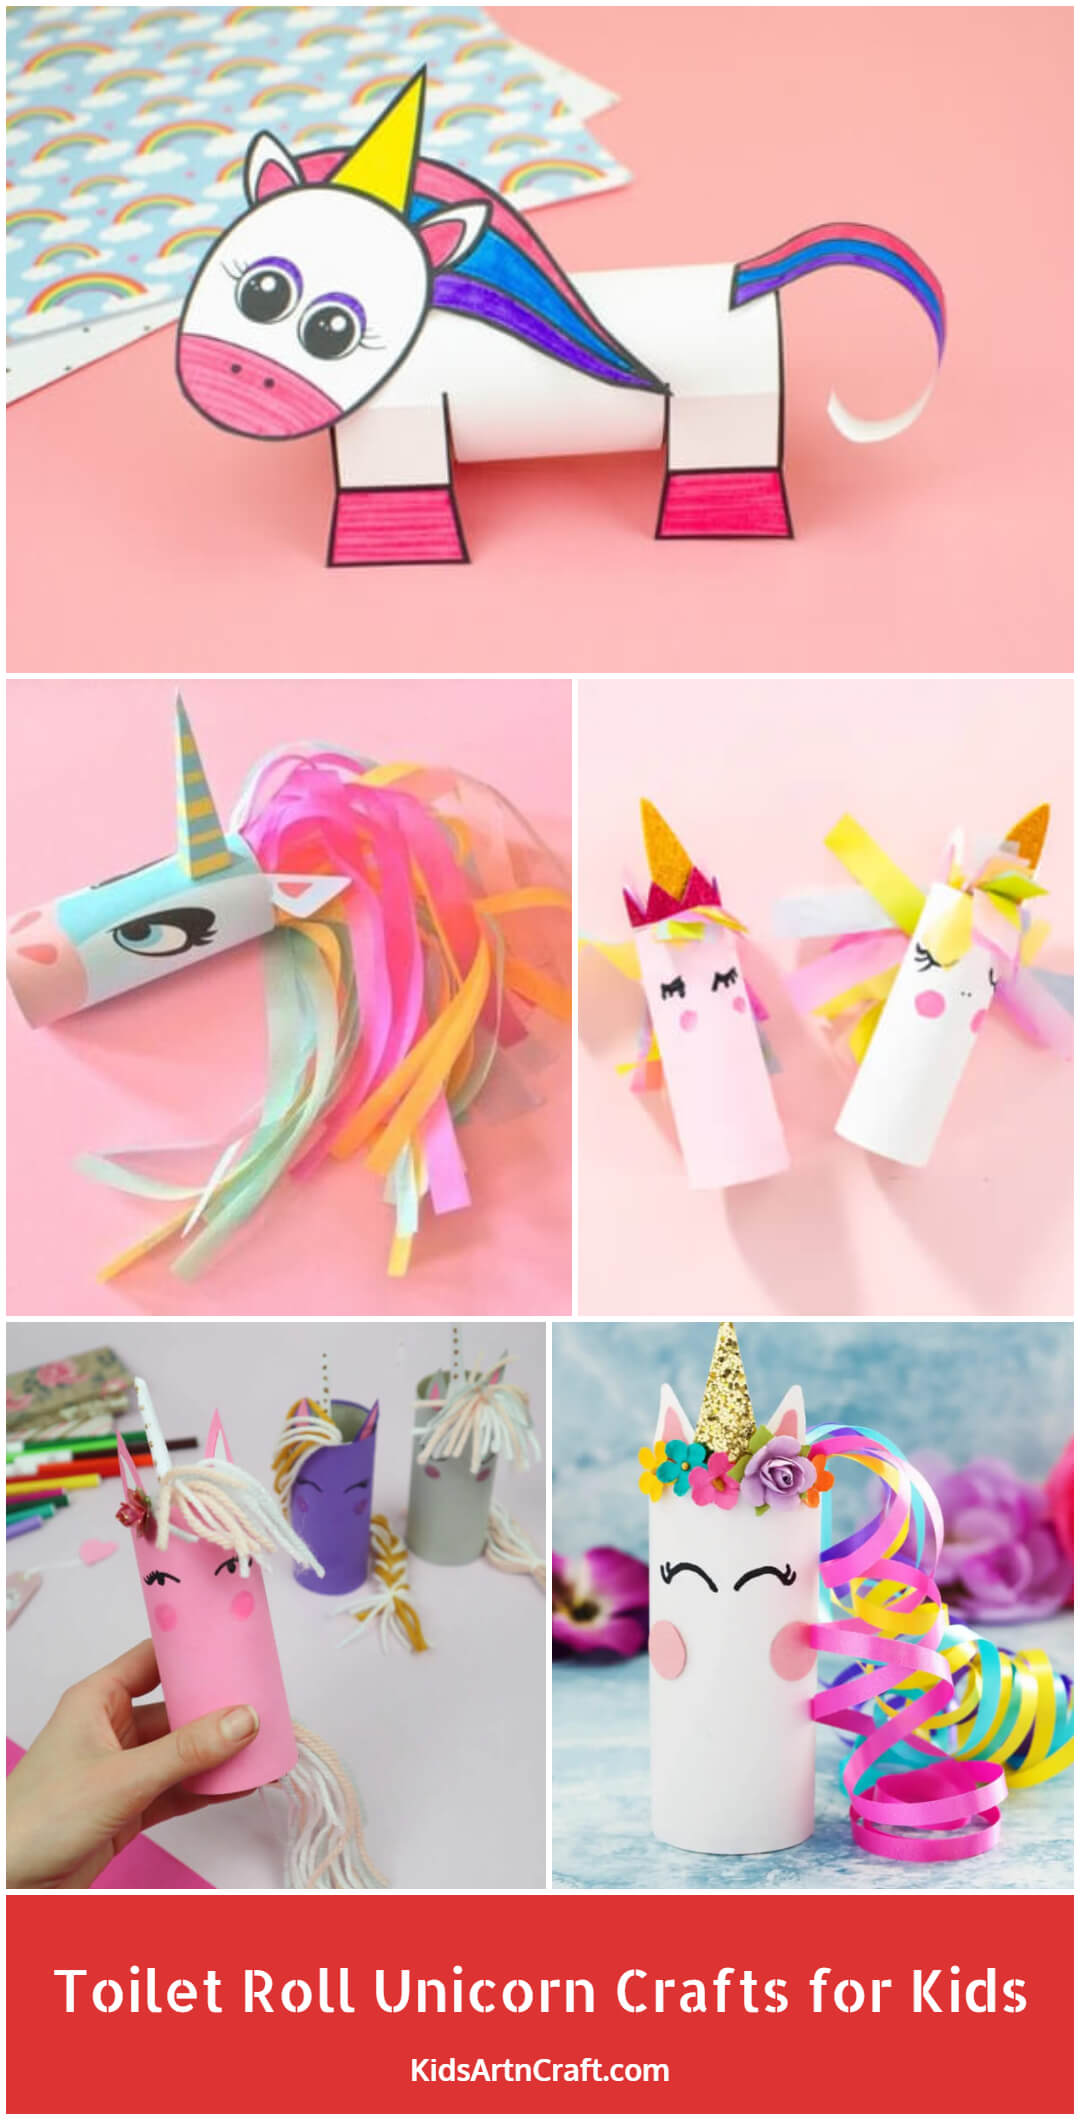 Toilet Roll Unicorn Crafts for Kids